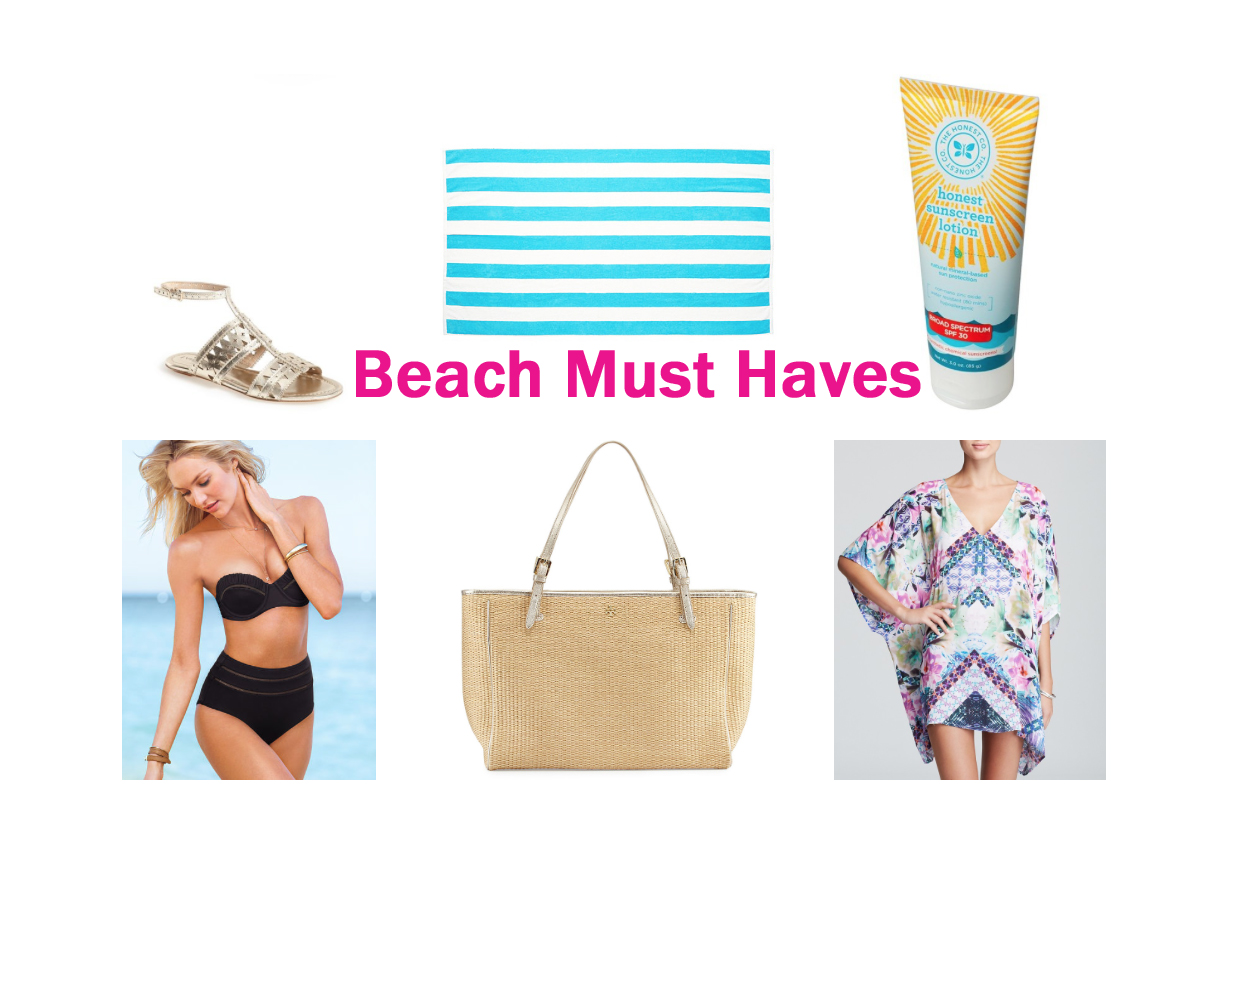 Beach Must Haves